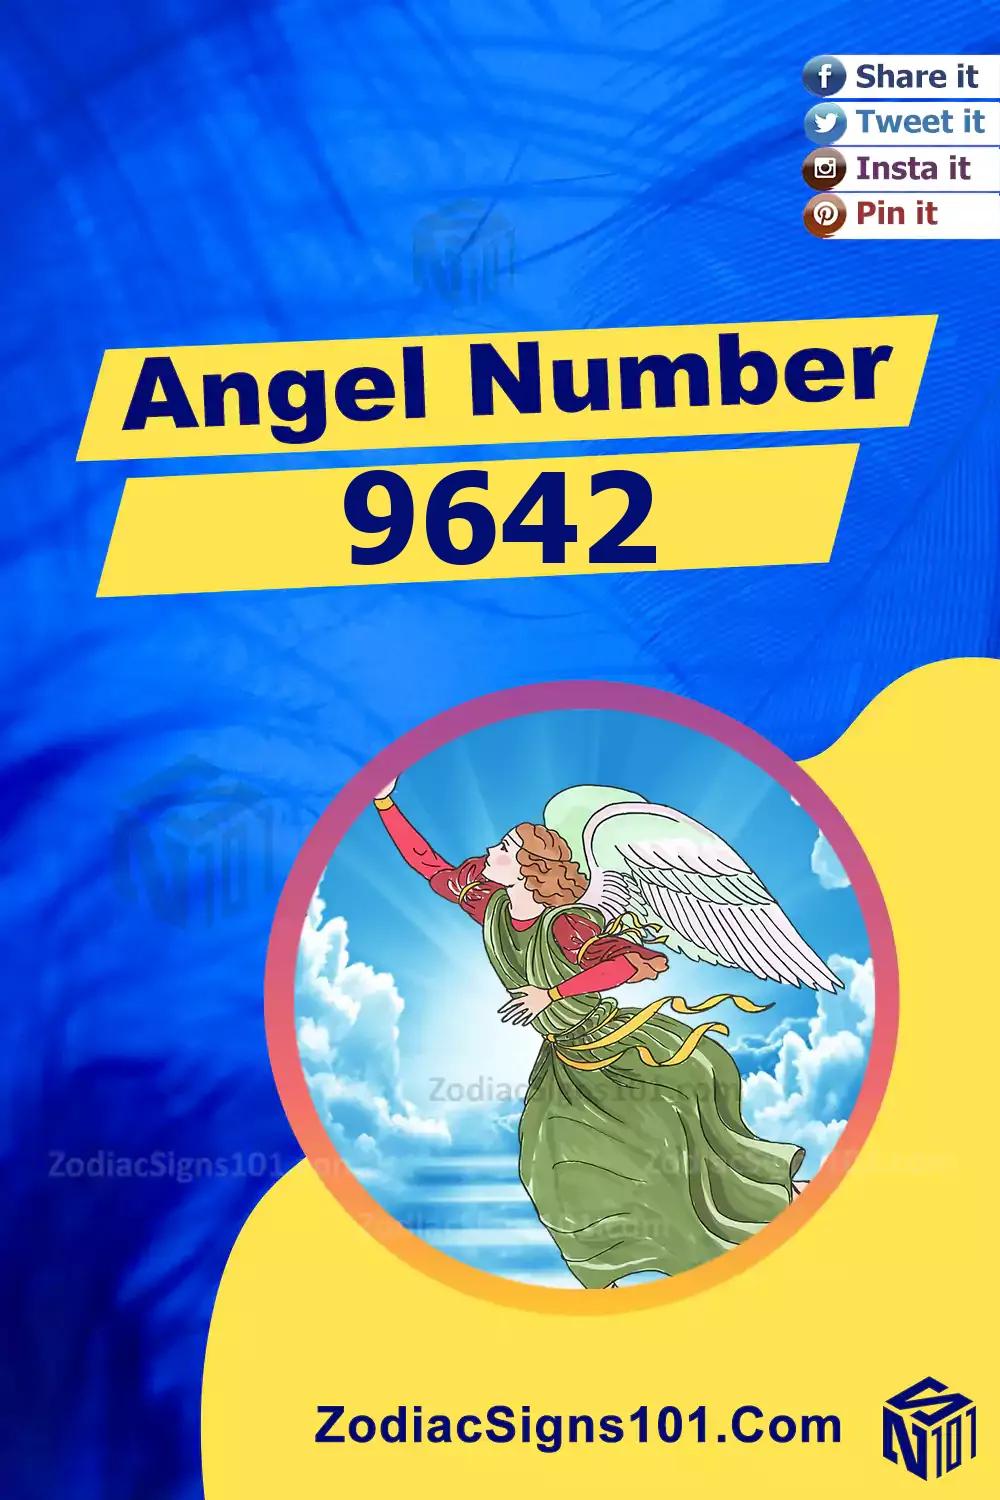 9642 Angel Number Meaning